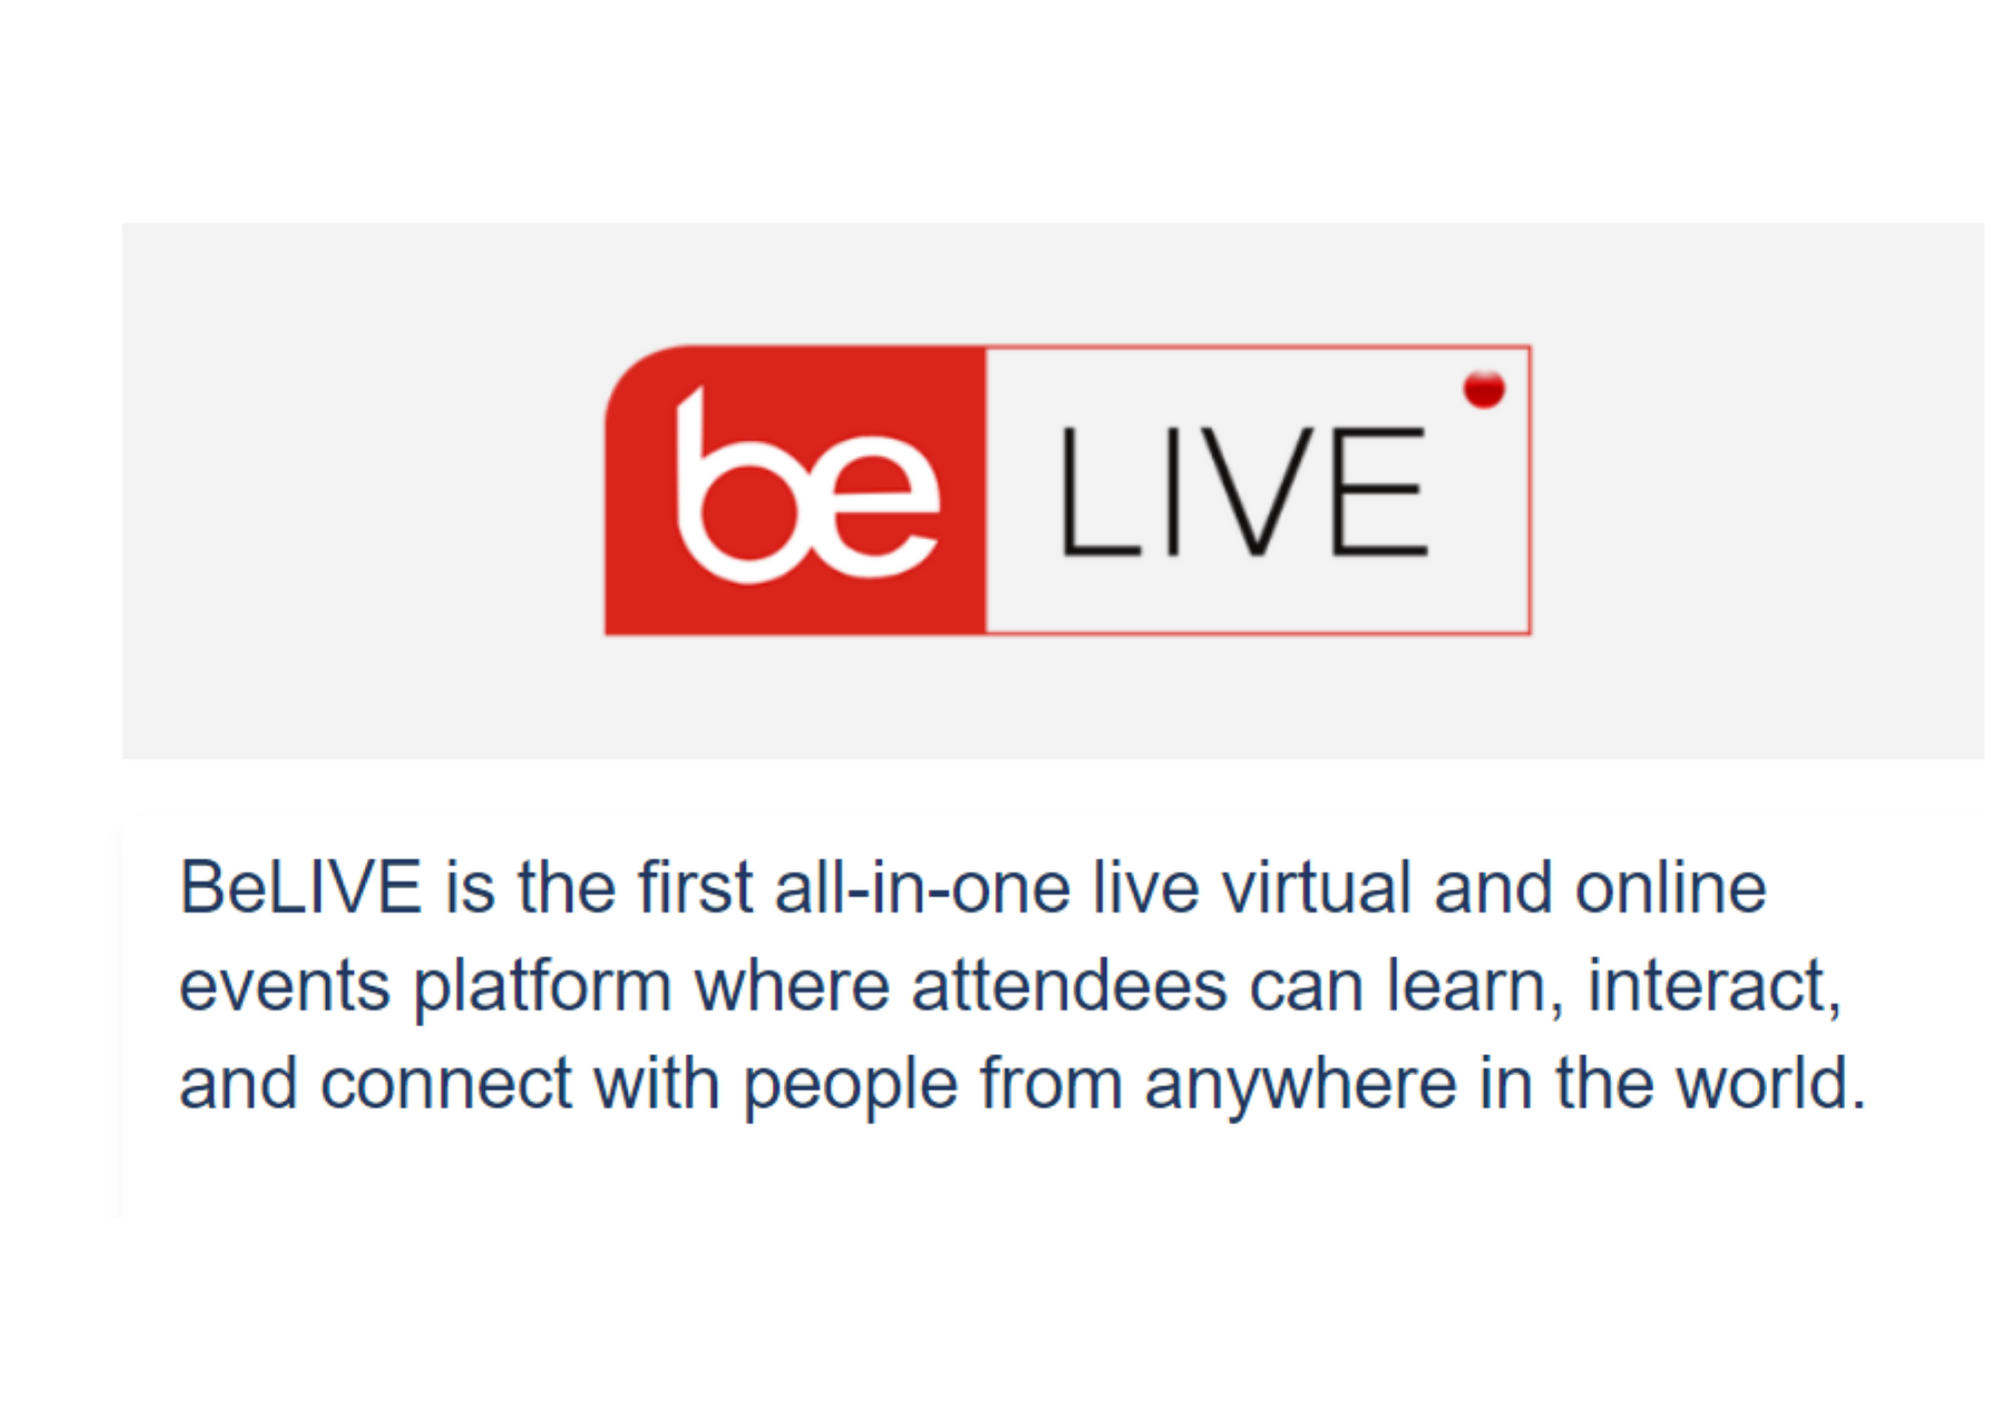 BeLIVE is the first all-in-one live virtual and online events platform where attendees can learn, interact, and connect with people from anywhere in the world.